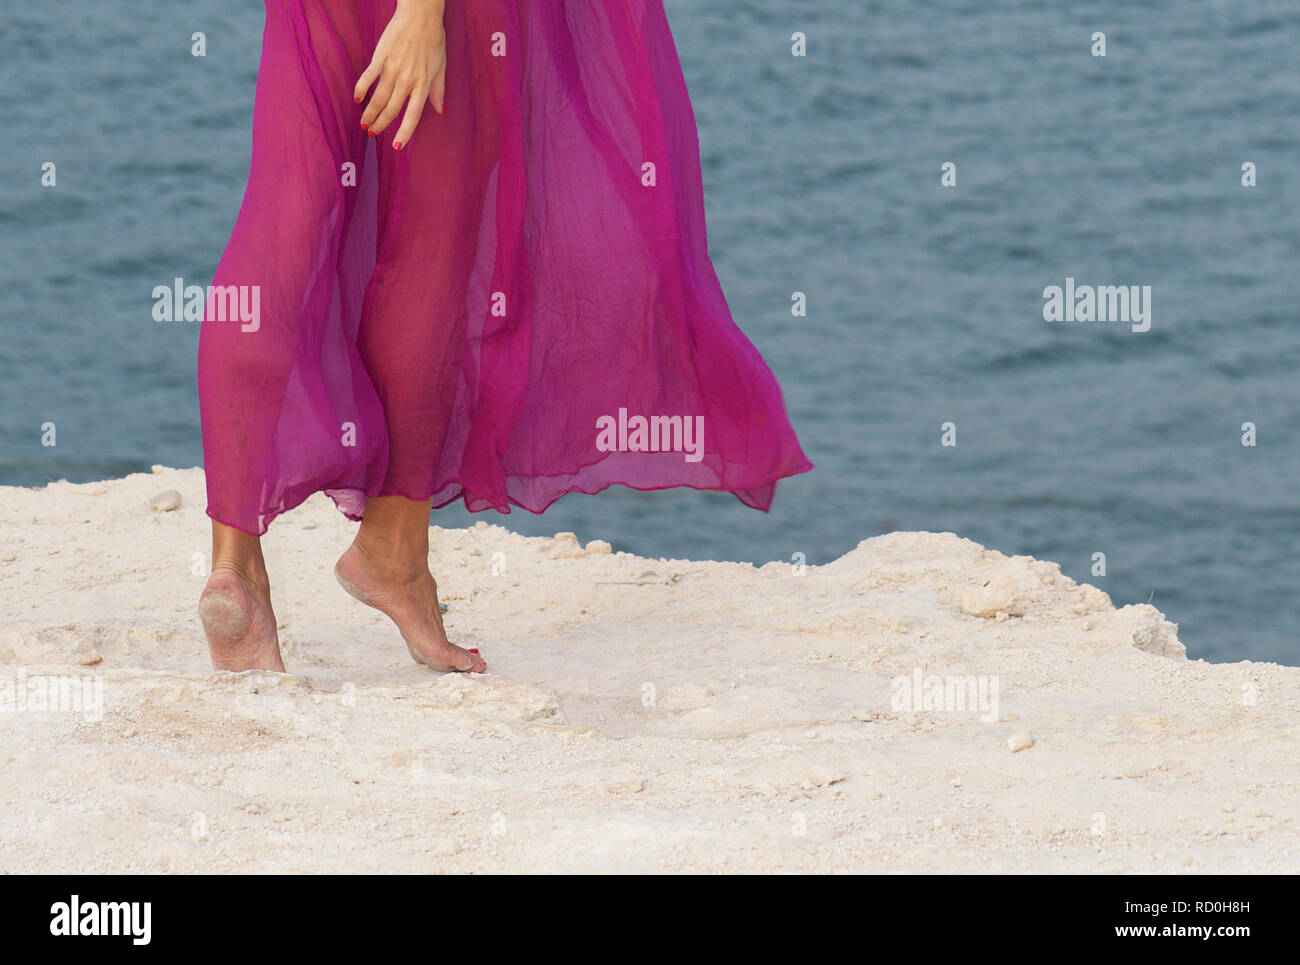 Close-up of a woman's legs standing on beach in a long dress Stock Photo